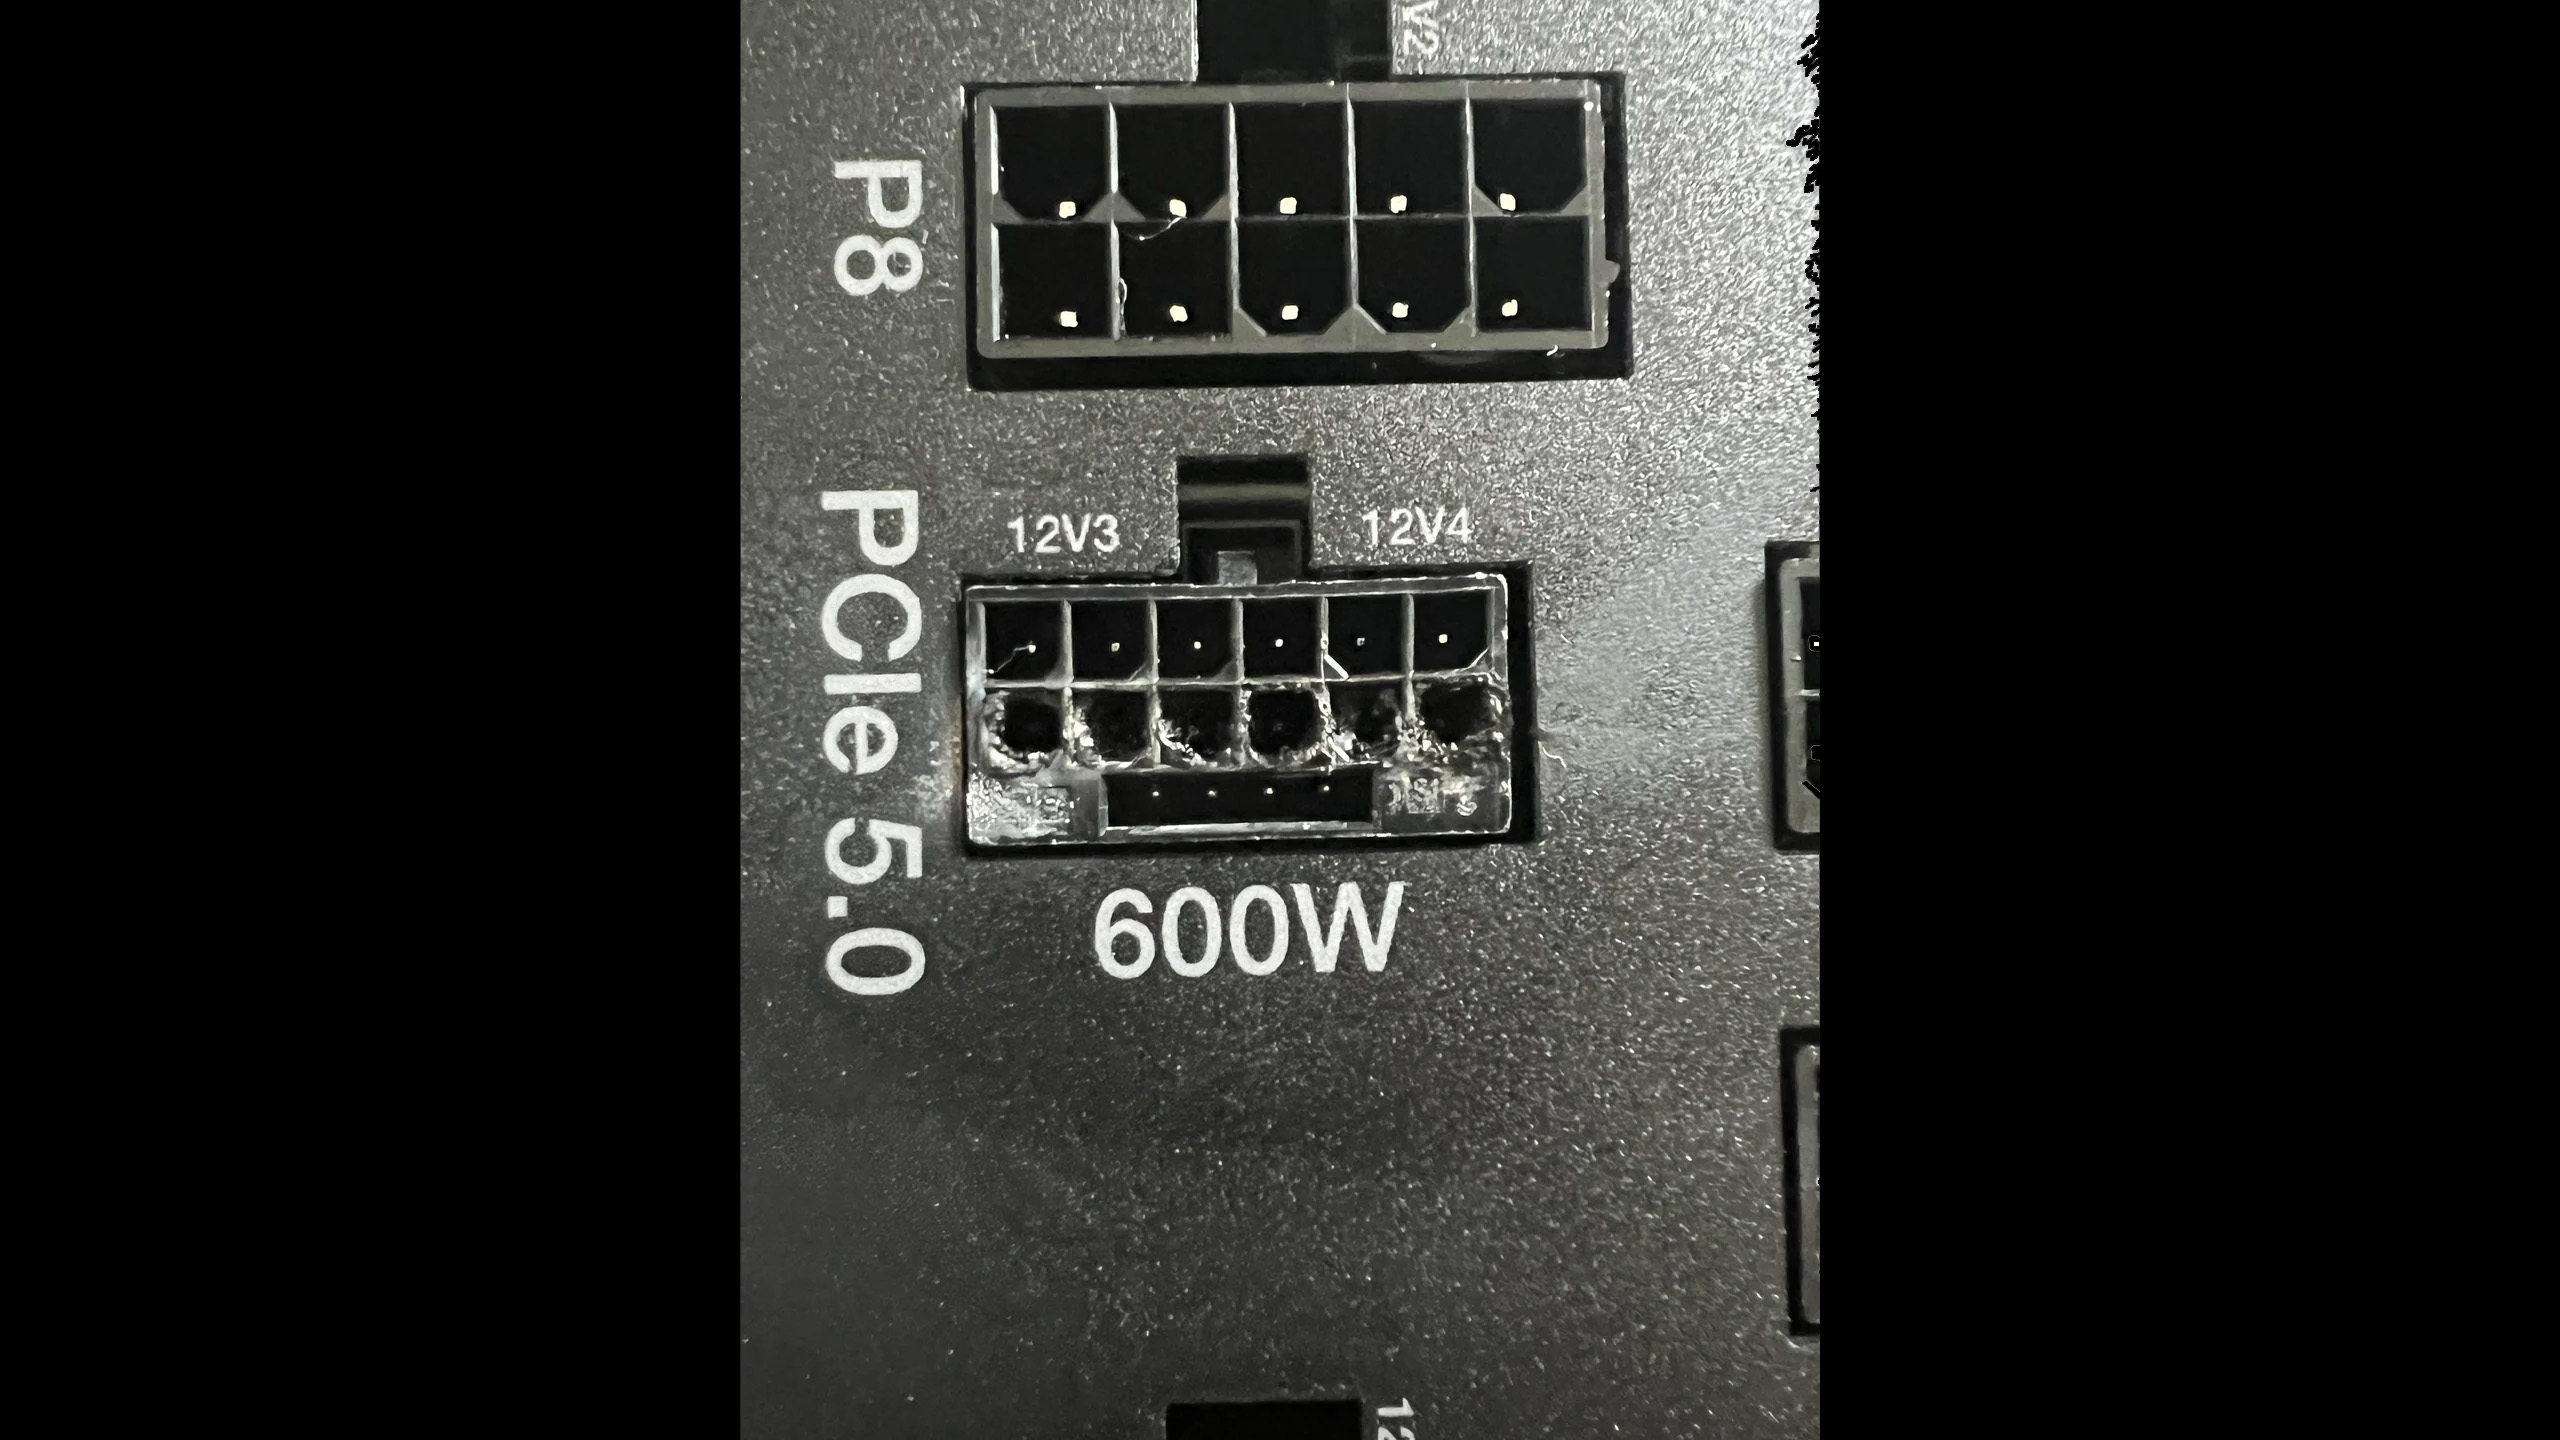 User Reports 12VHPWR Connector Melting From the PSU Side (Updated)